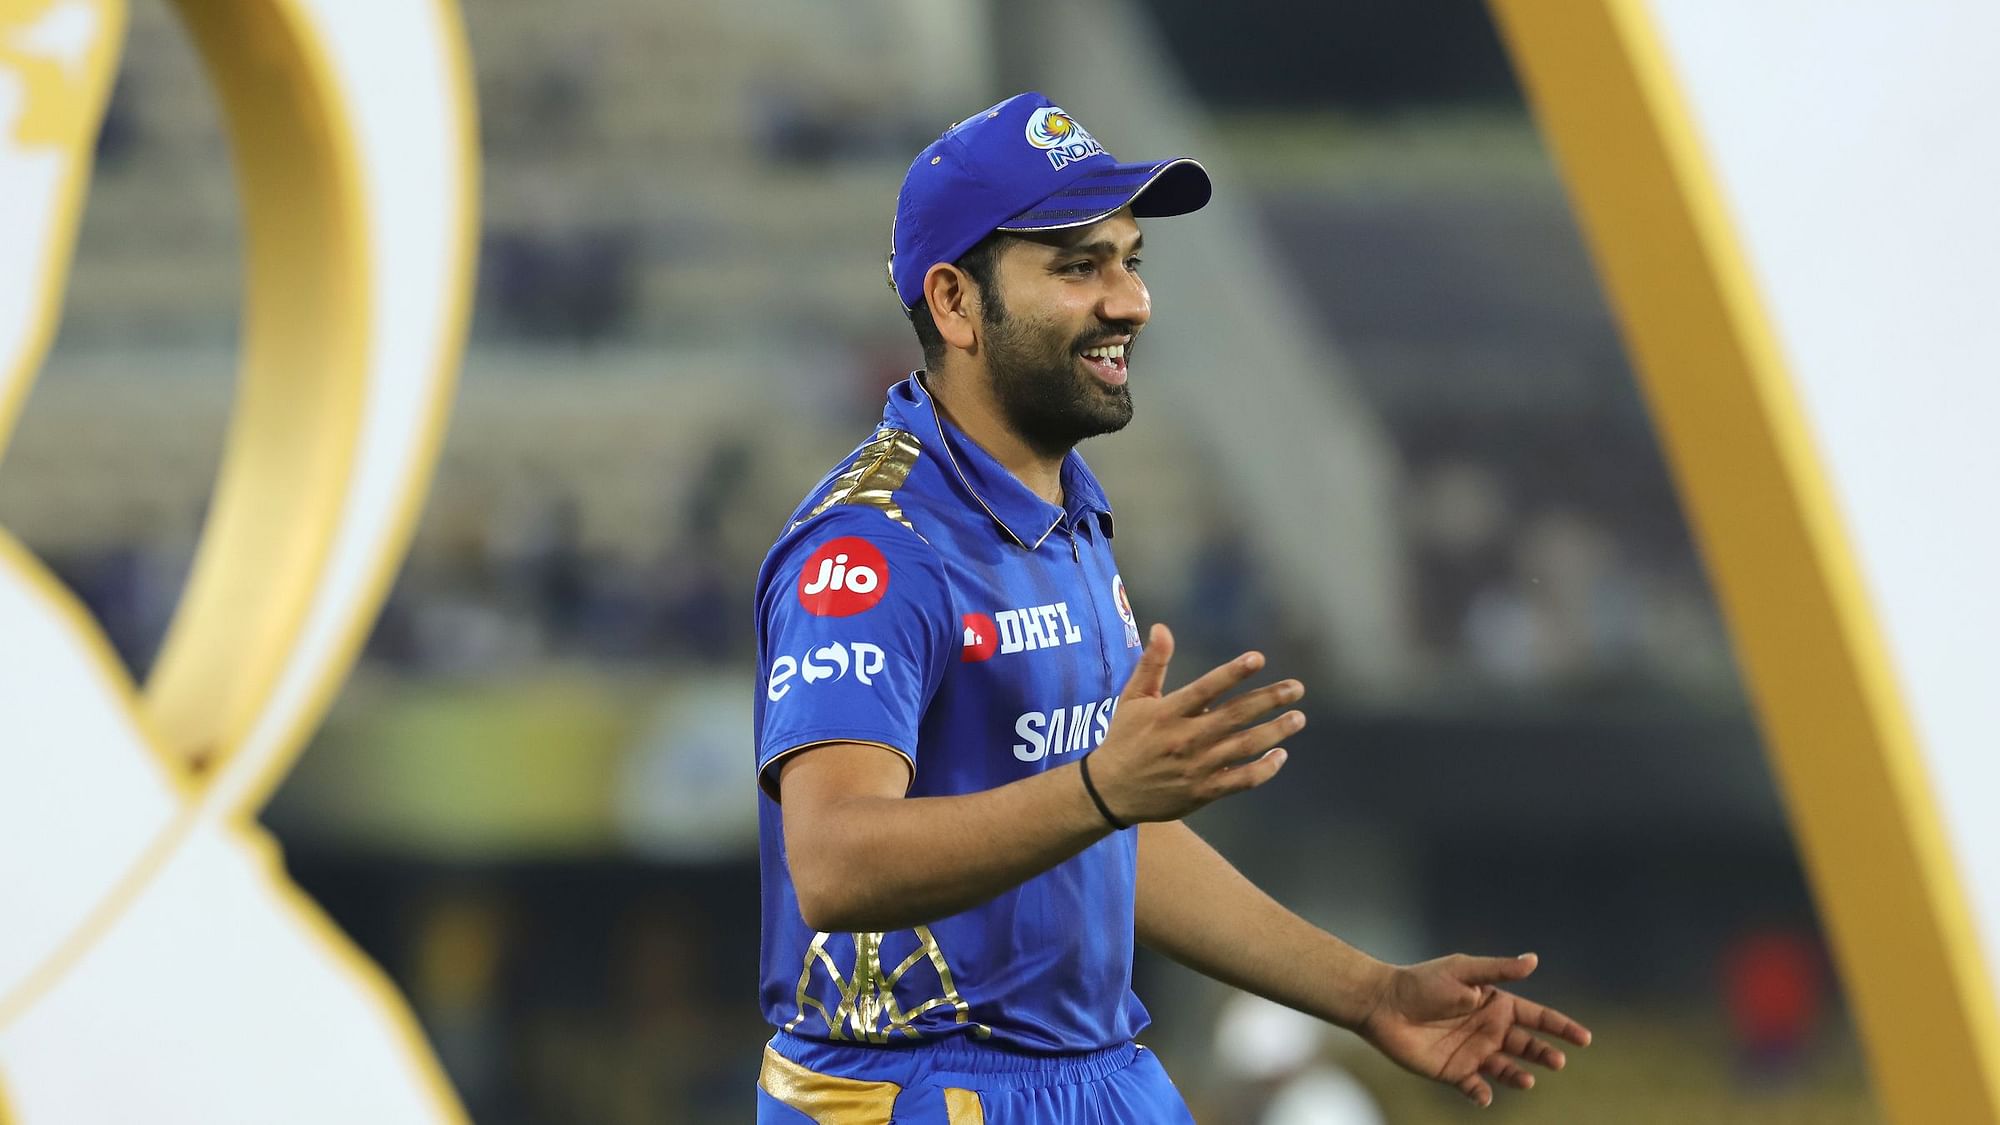 With the lockdown due to coronavirus, senior India opener Rohit Sharma feels the Indian Premier League (IPL) can wait for the time being.